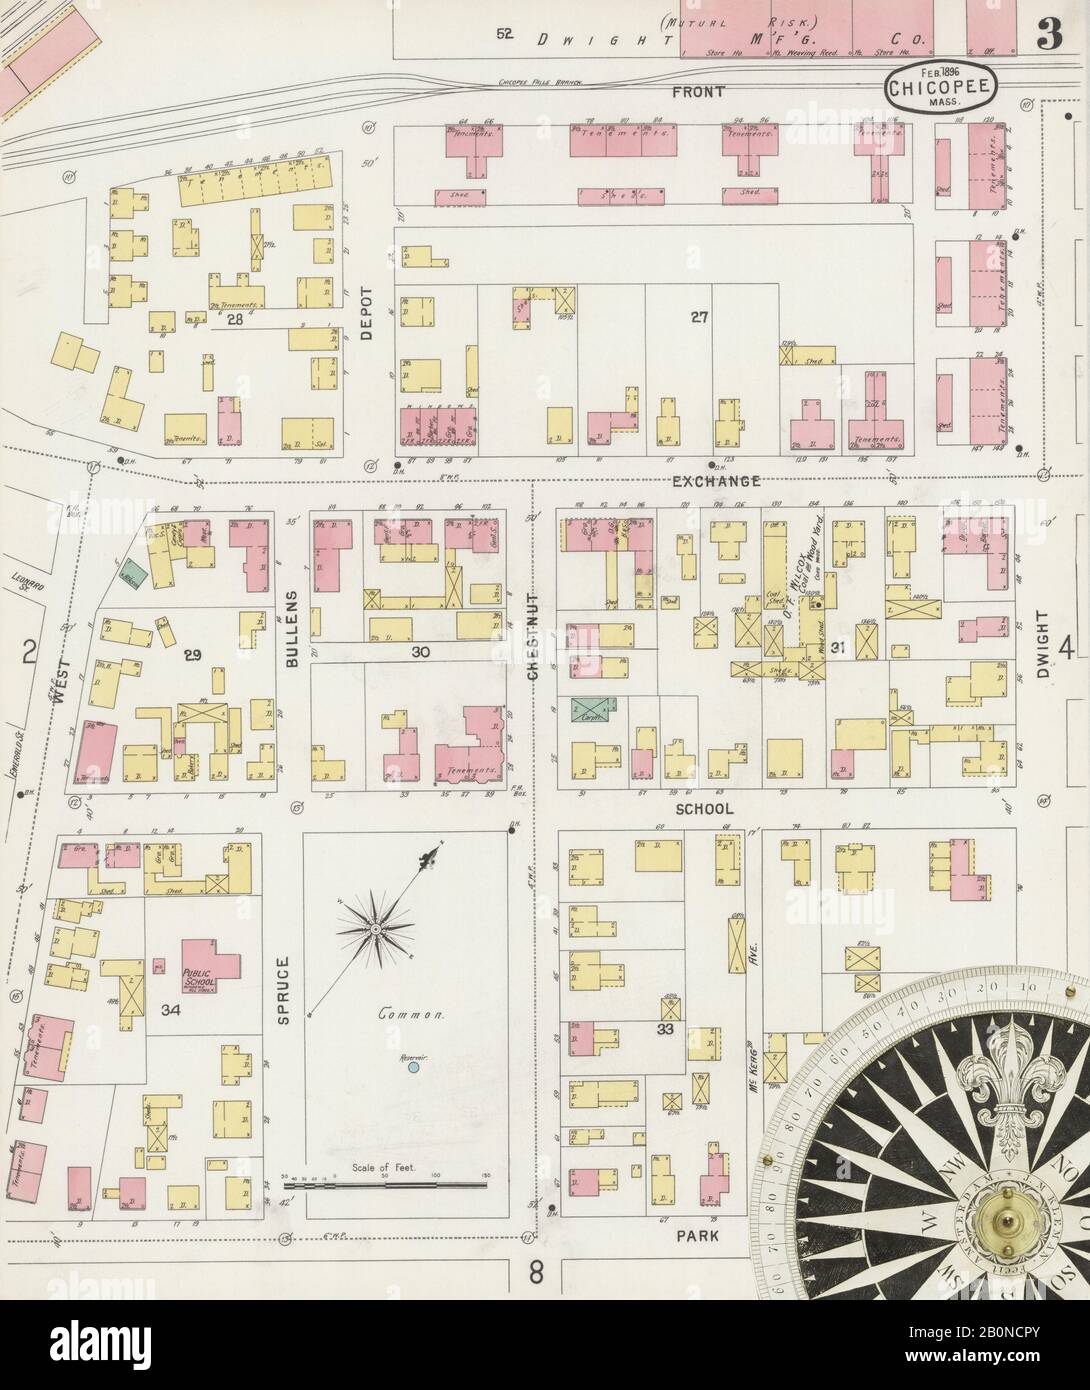 Image 3 of Sanborn Fire Insurance Map from Chicopee, Hampden County, Massachusetts. Feb 1896. 16 Sheet(s). Includes Chicopee Falls, America, street map with a Nineteenth Century compass Stock Photo